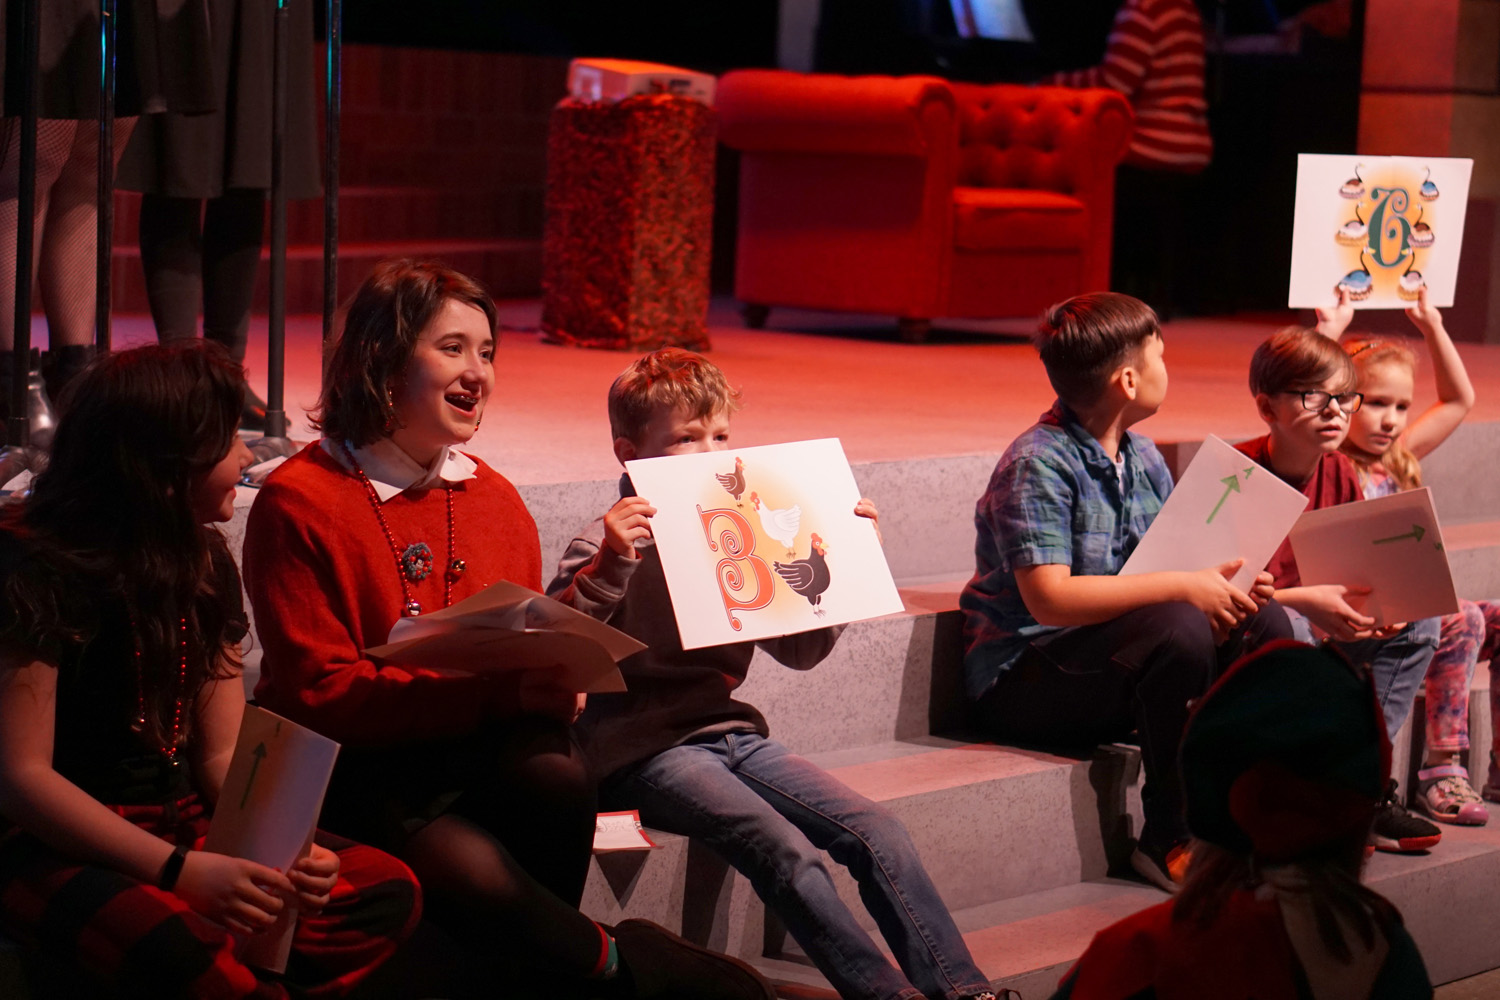 Kids sitting on the front of the stage participate in The 12 Days of Christmas, holding up signs to prompt the next lyrics.